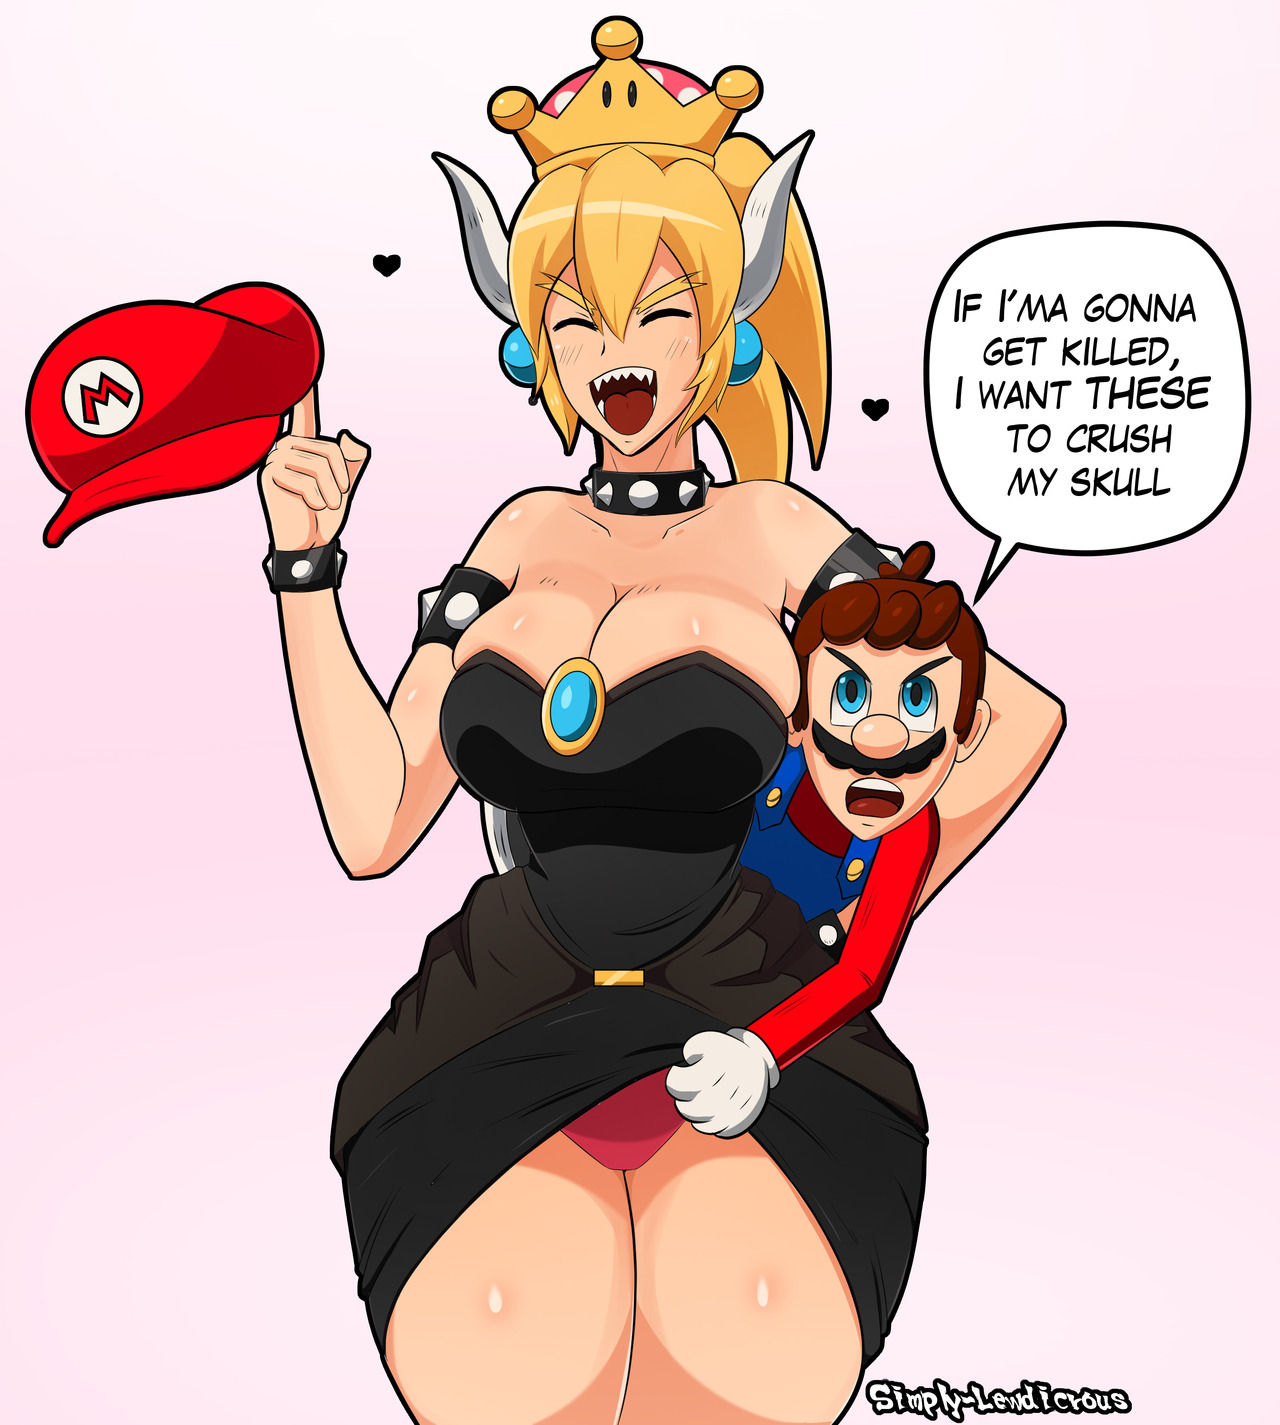 simply-lewdicrous:I decided to hop in on the Bowsette memery. I’ve actually never